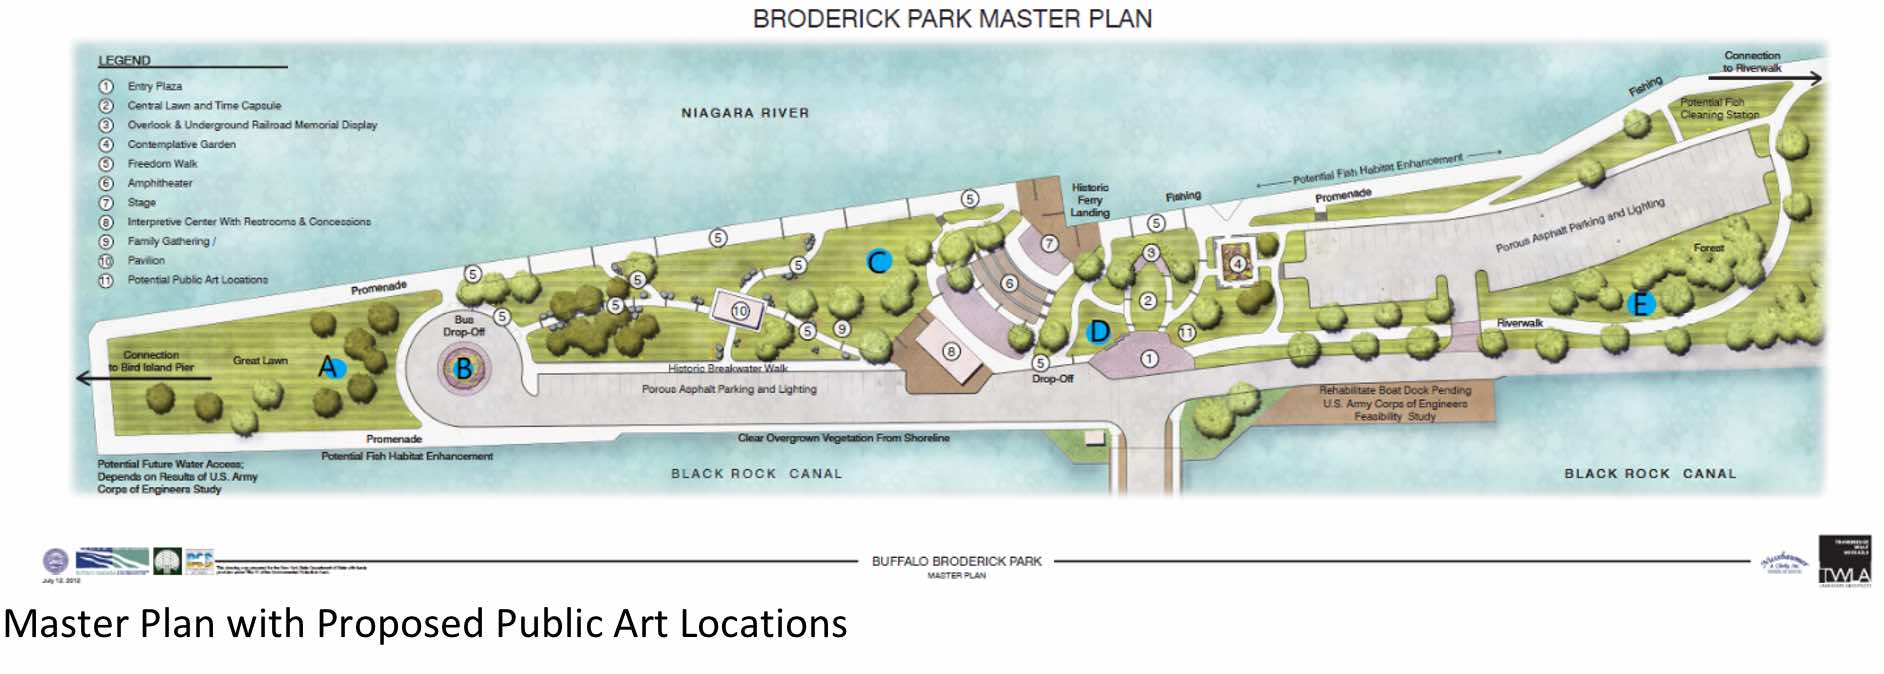 ‘World Class Memorial’ project proposal for Broderick Park